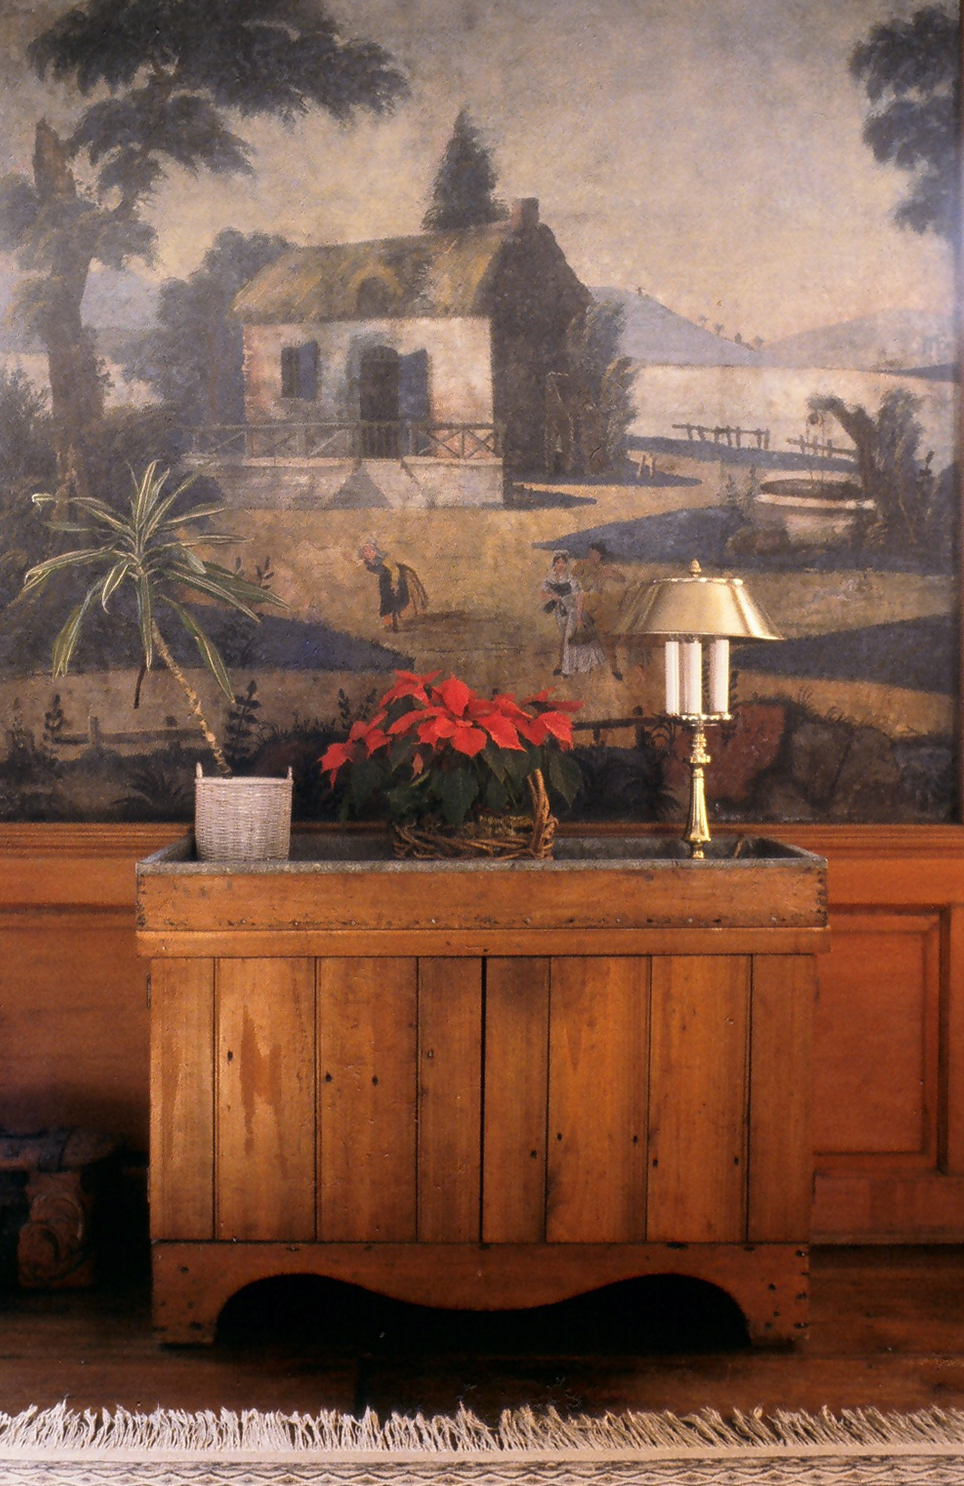 The murals in the Dining Room have been restored